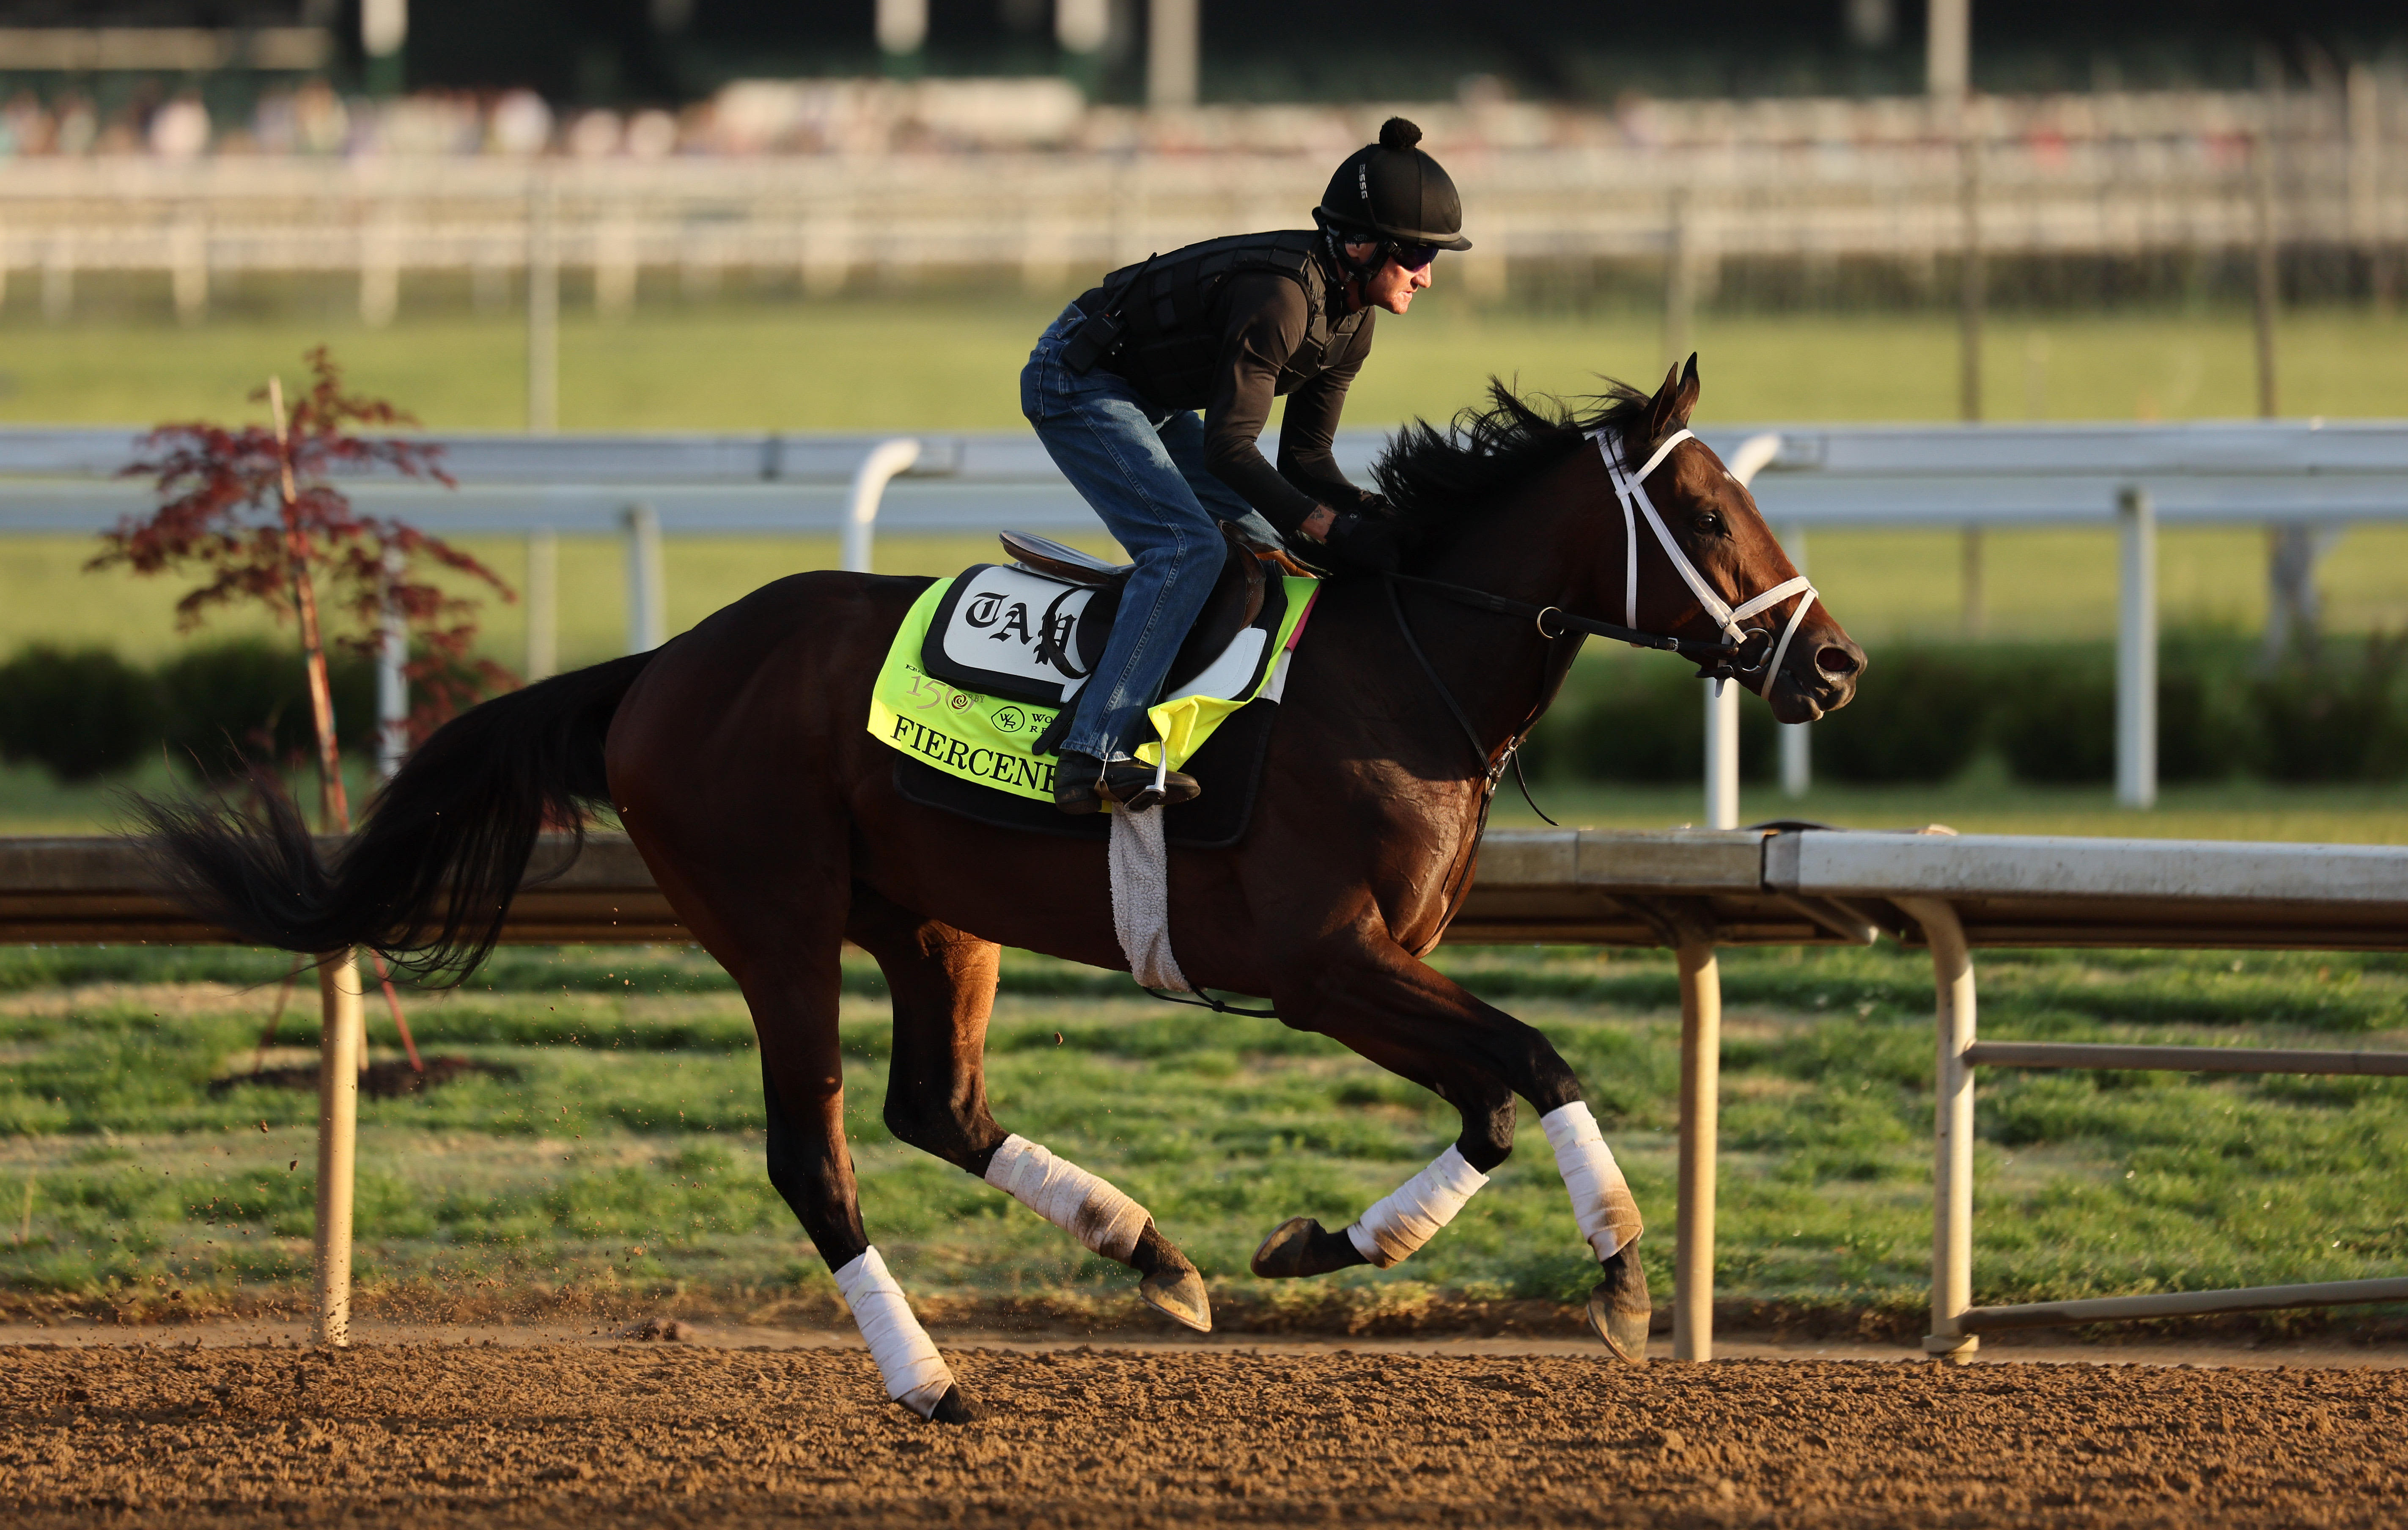 Kentucky Derby post positions updated after horse scratches from race